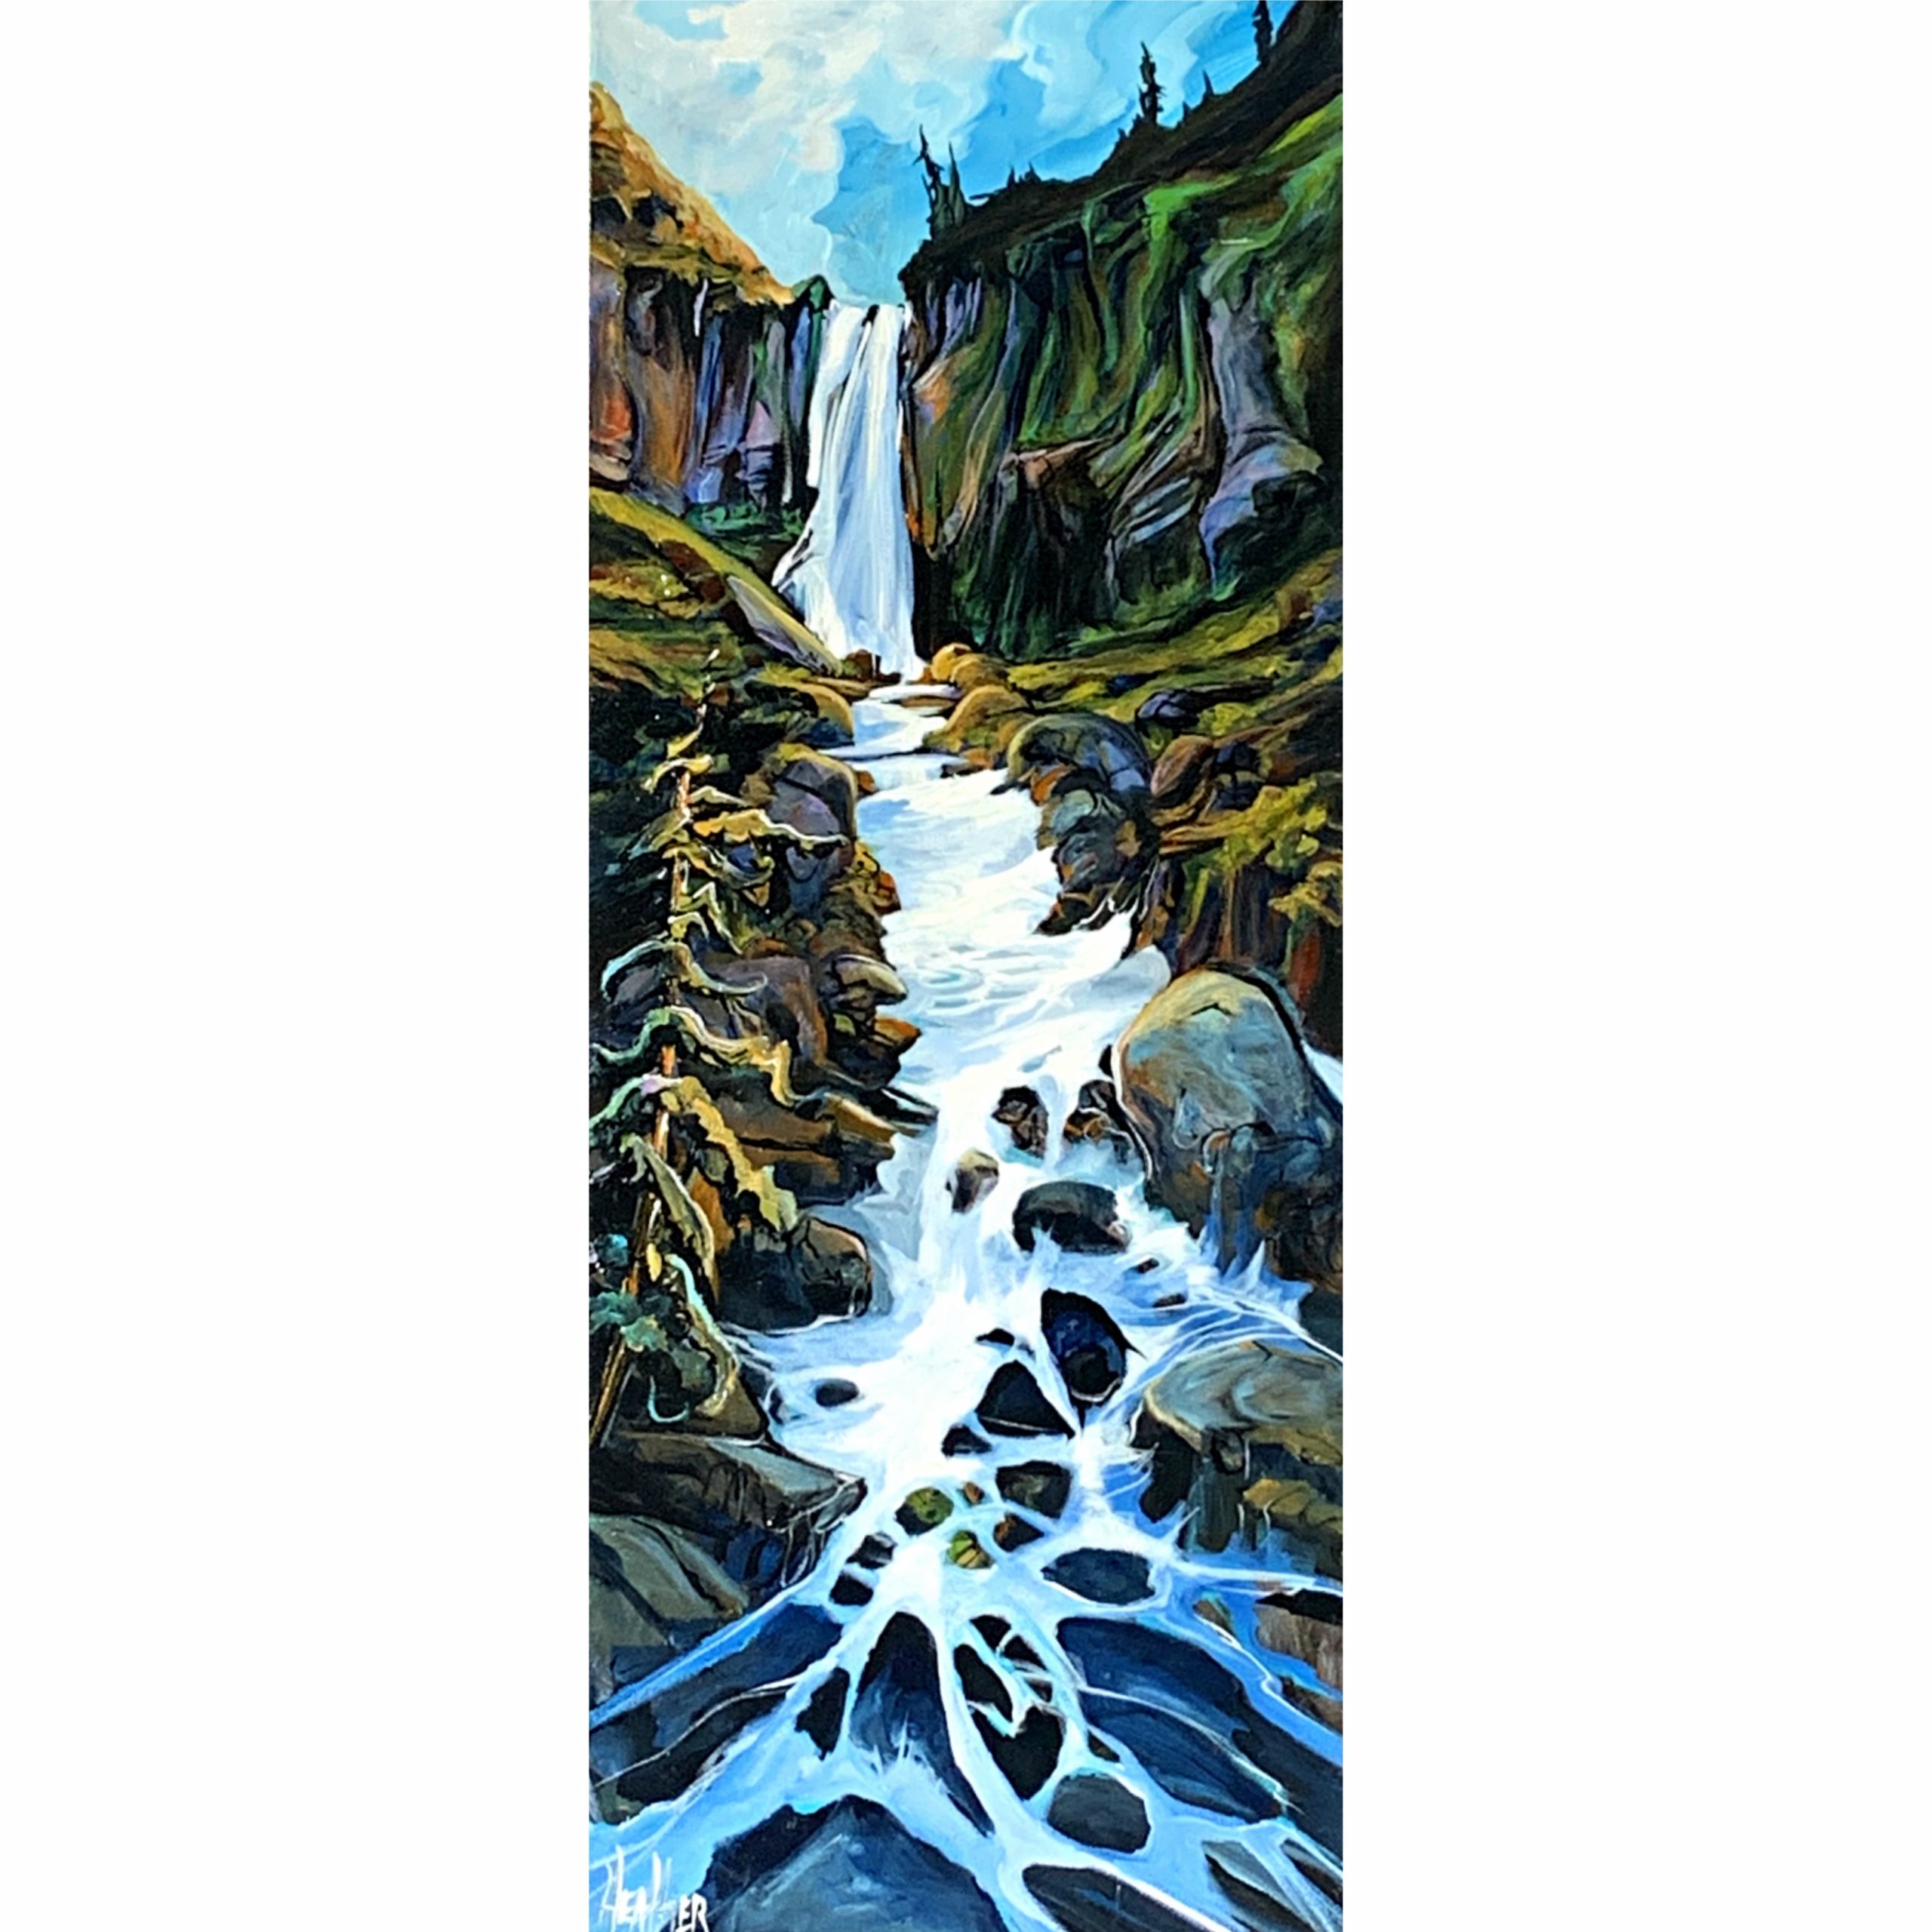 In the Midst, acrylic waterfall painting by Heather Pant | Effusion Art Gallery + Cast Glass Studio, Invermere BC